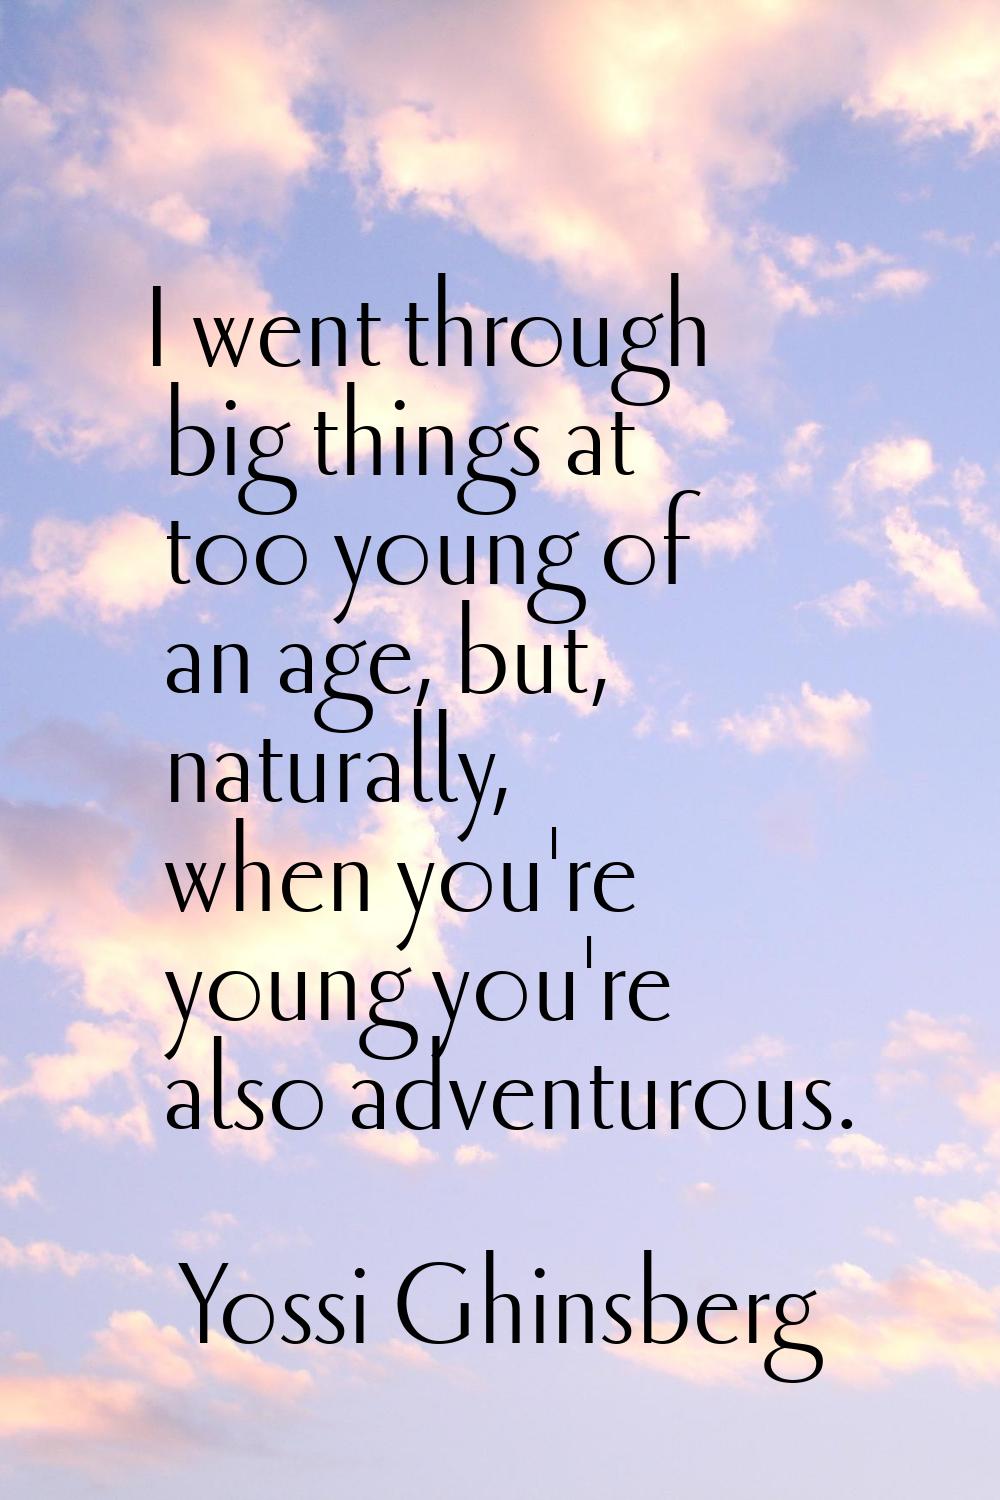 I went through big things at too young of an age, but, naturally, when you're young you're also adv